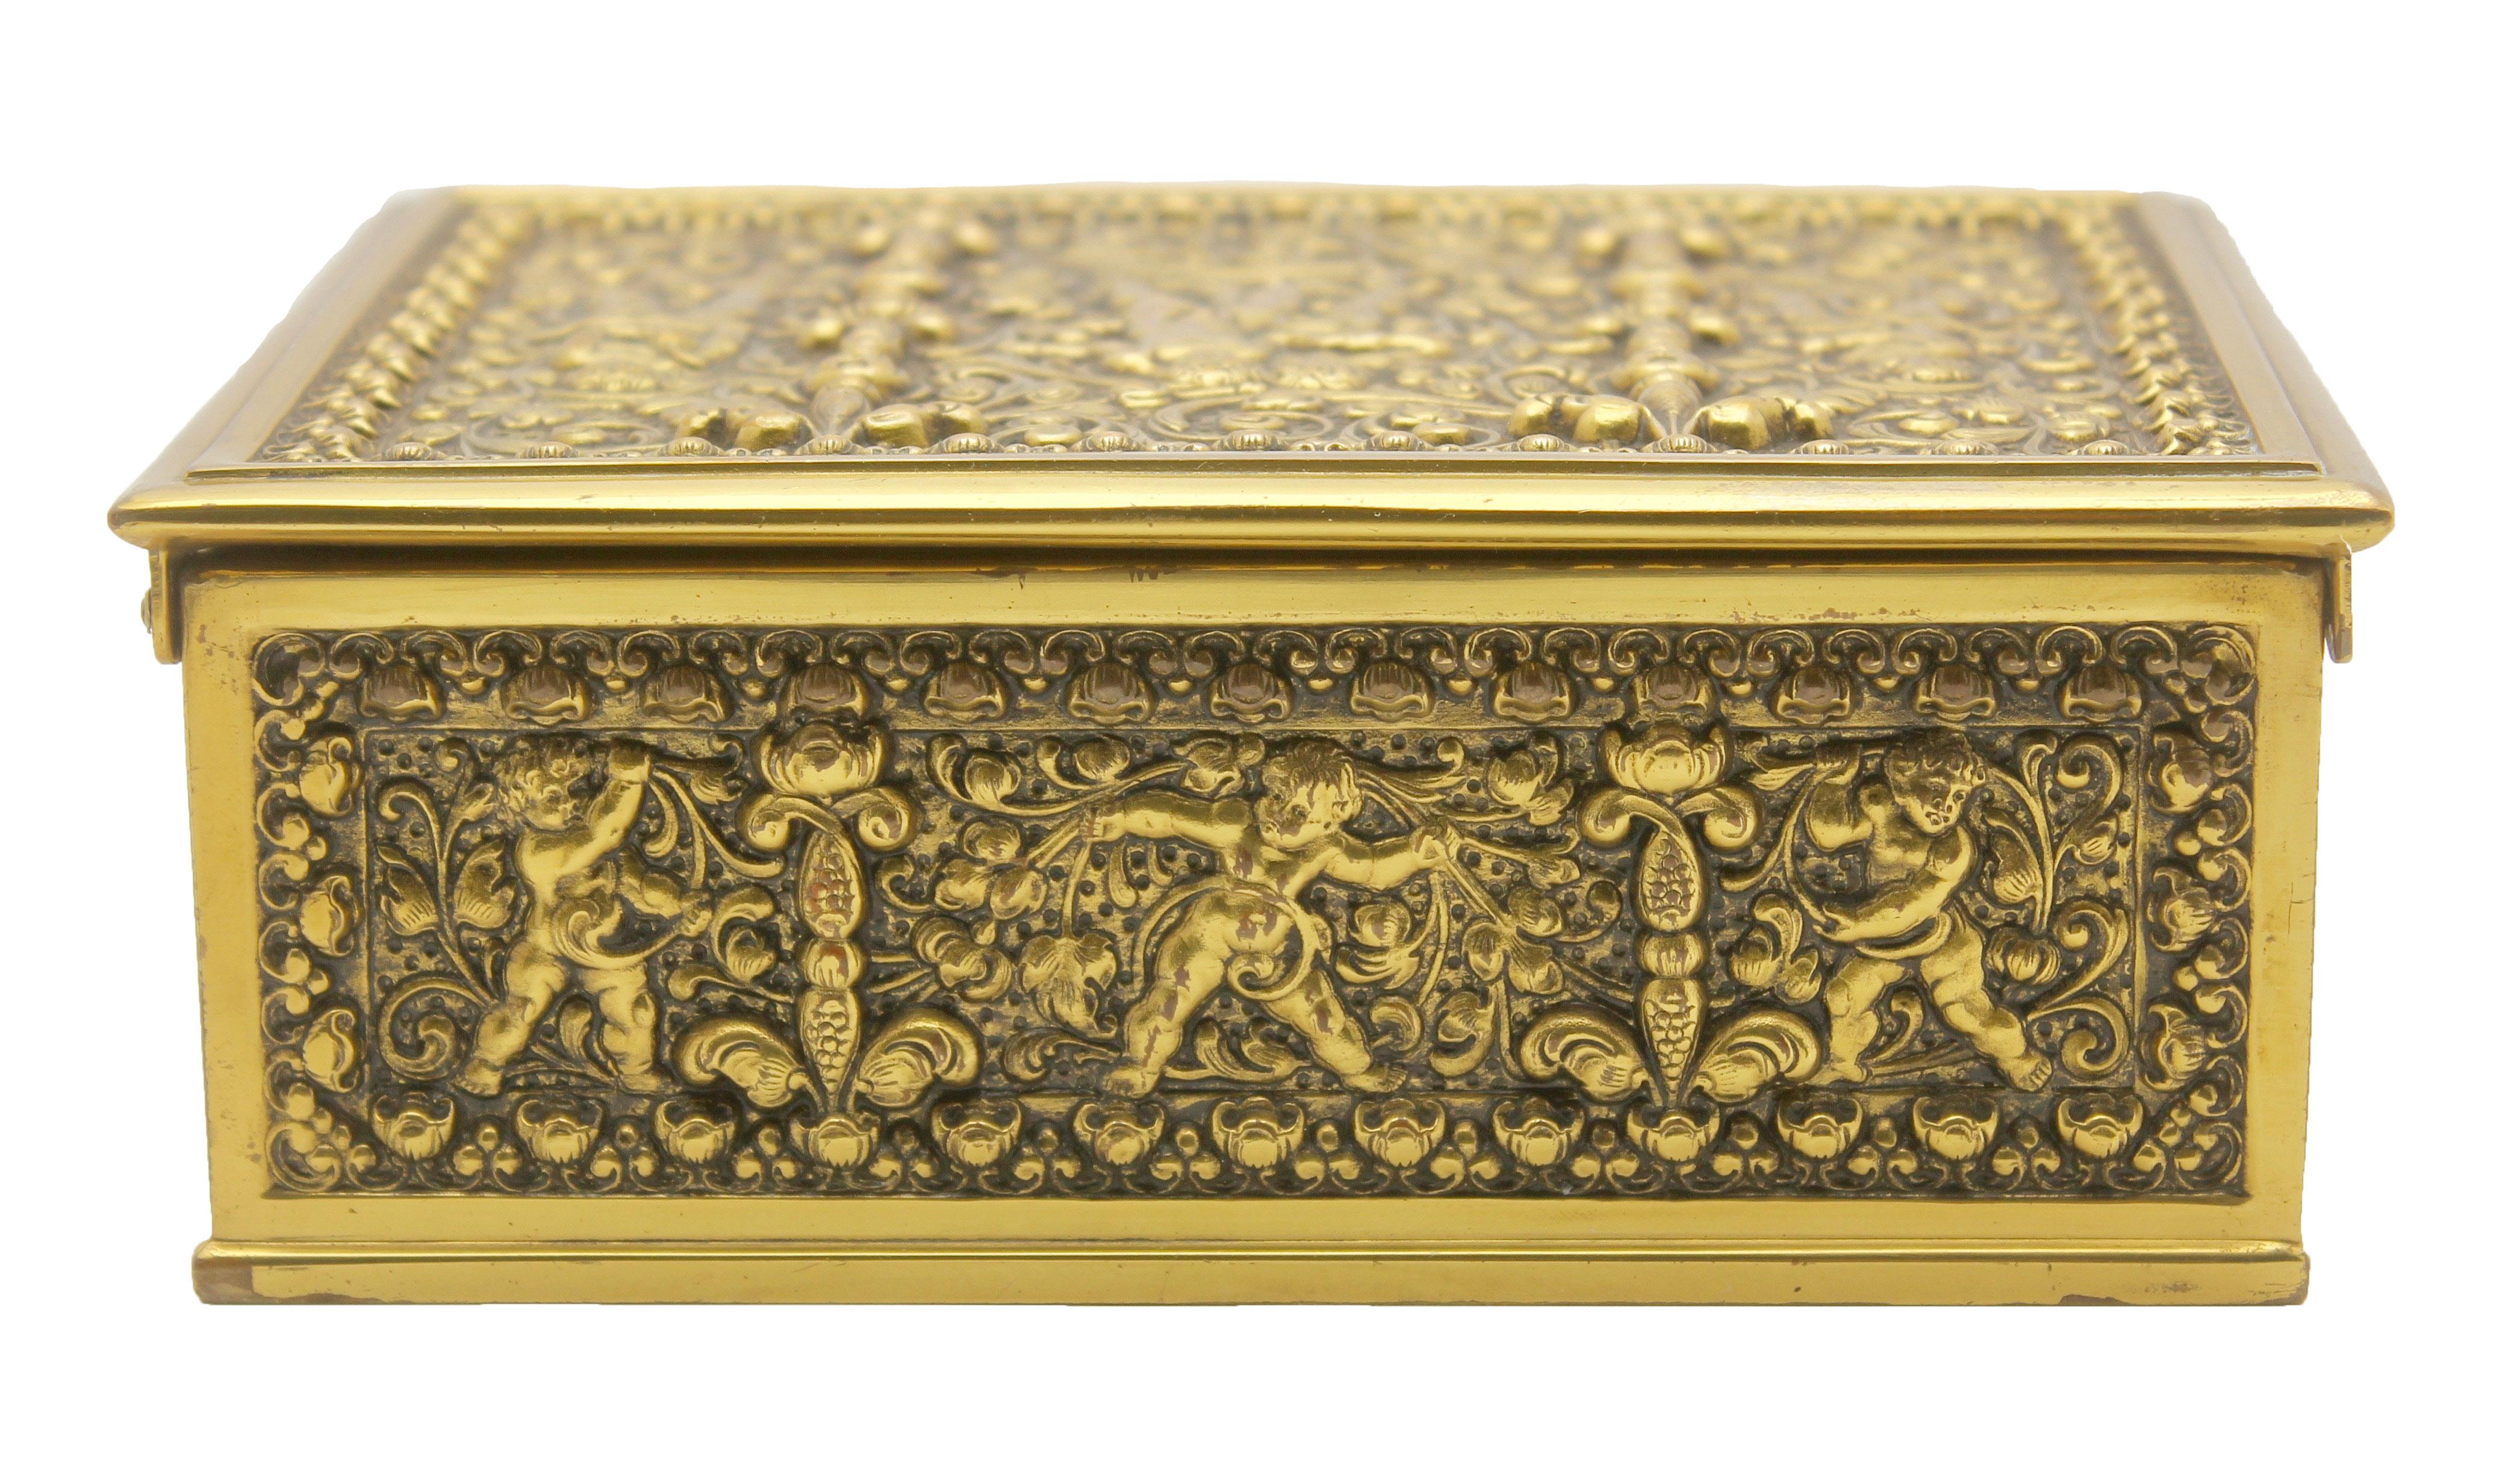 Erhard & Sons Art Nouveau brass repousse tobacco or jewelry box signed

The top, front, sides and back are beautifully cast in gilt brass and feature panels
with image of angels.
The inner side is covered with cedar wood.
Nice original patina.